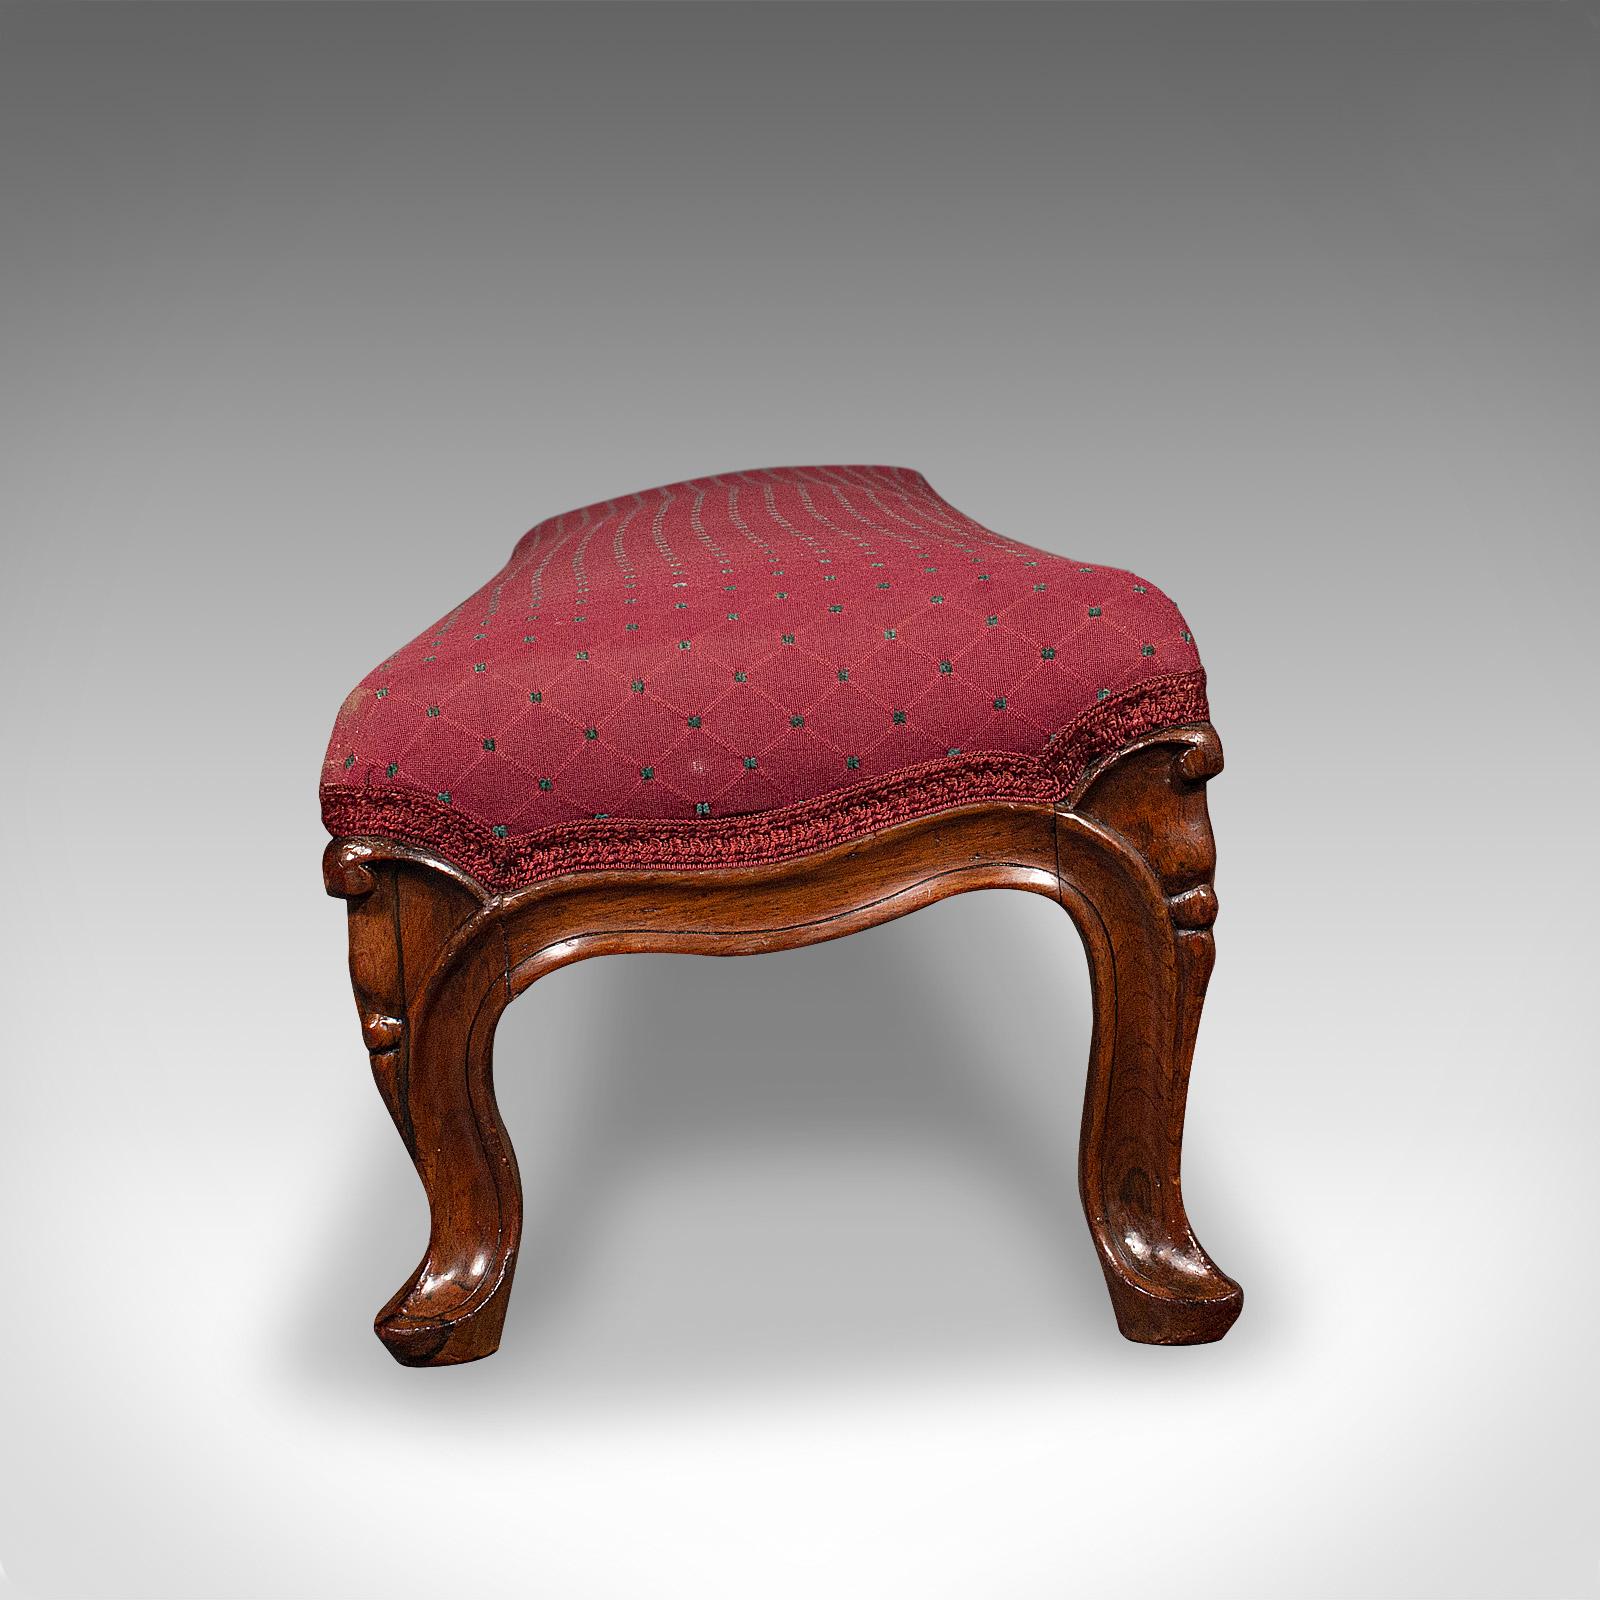 Early Victorian Antique Carriage Stool, English, Walnut, Fireside Foot Rest, Victorian, C.1840 For Sale